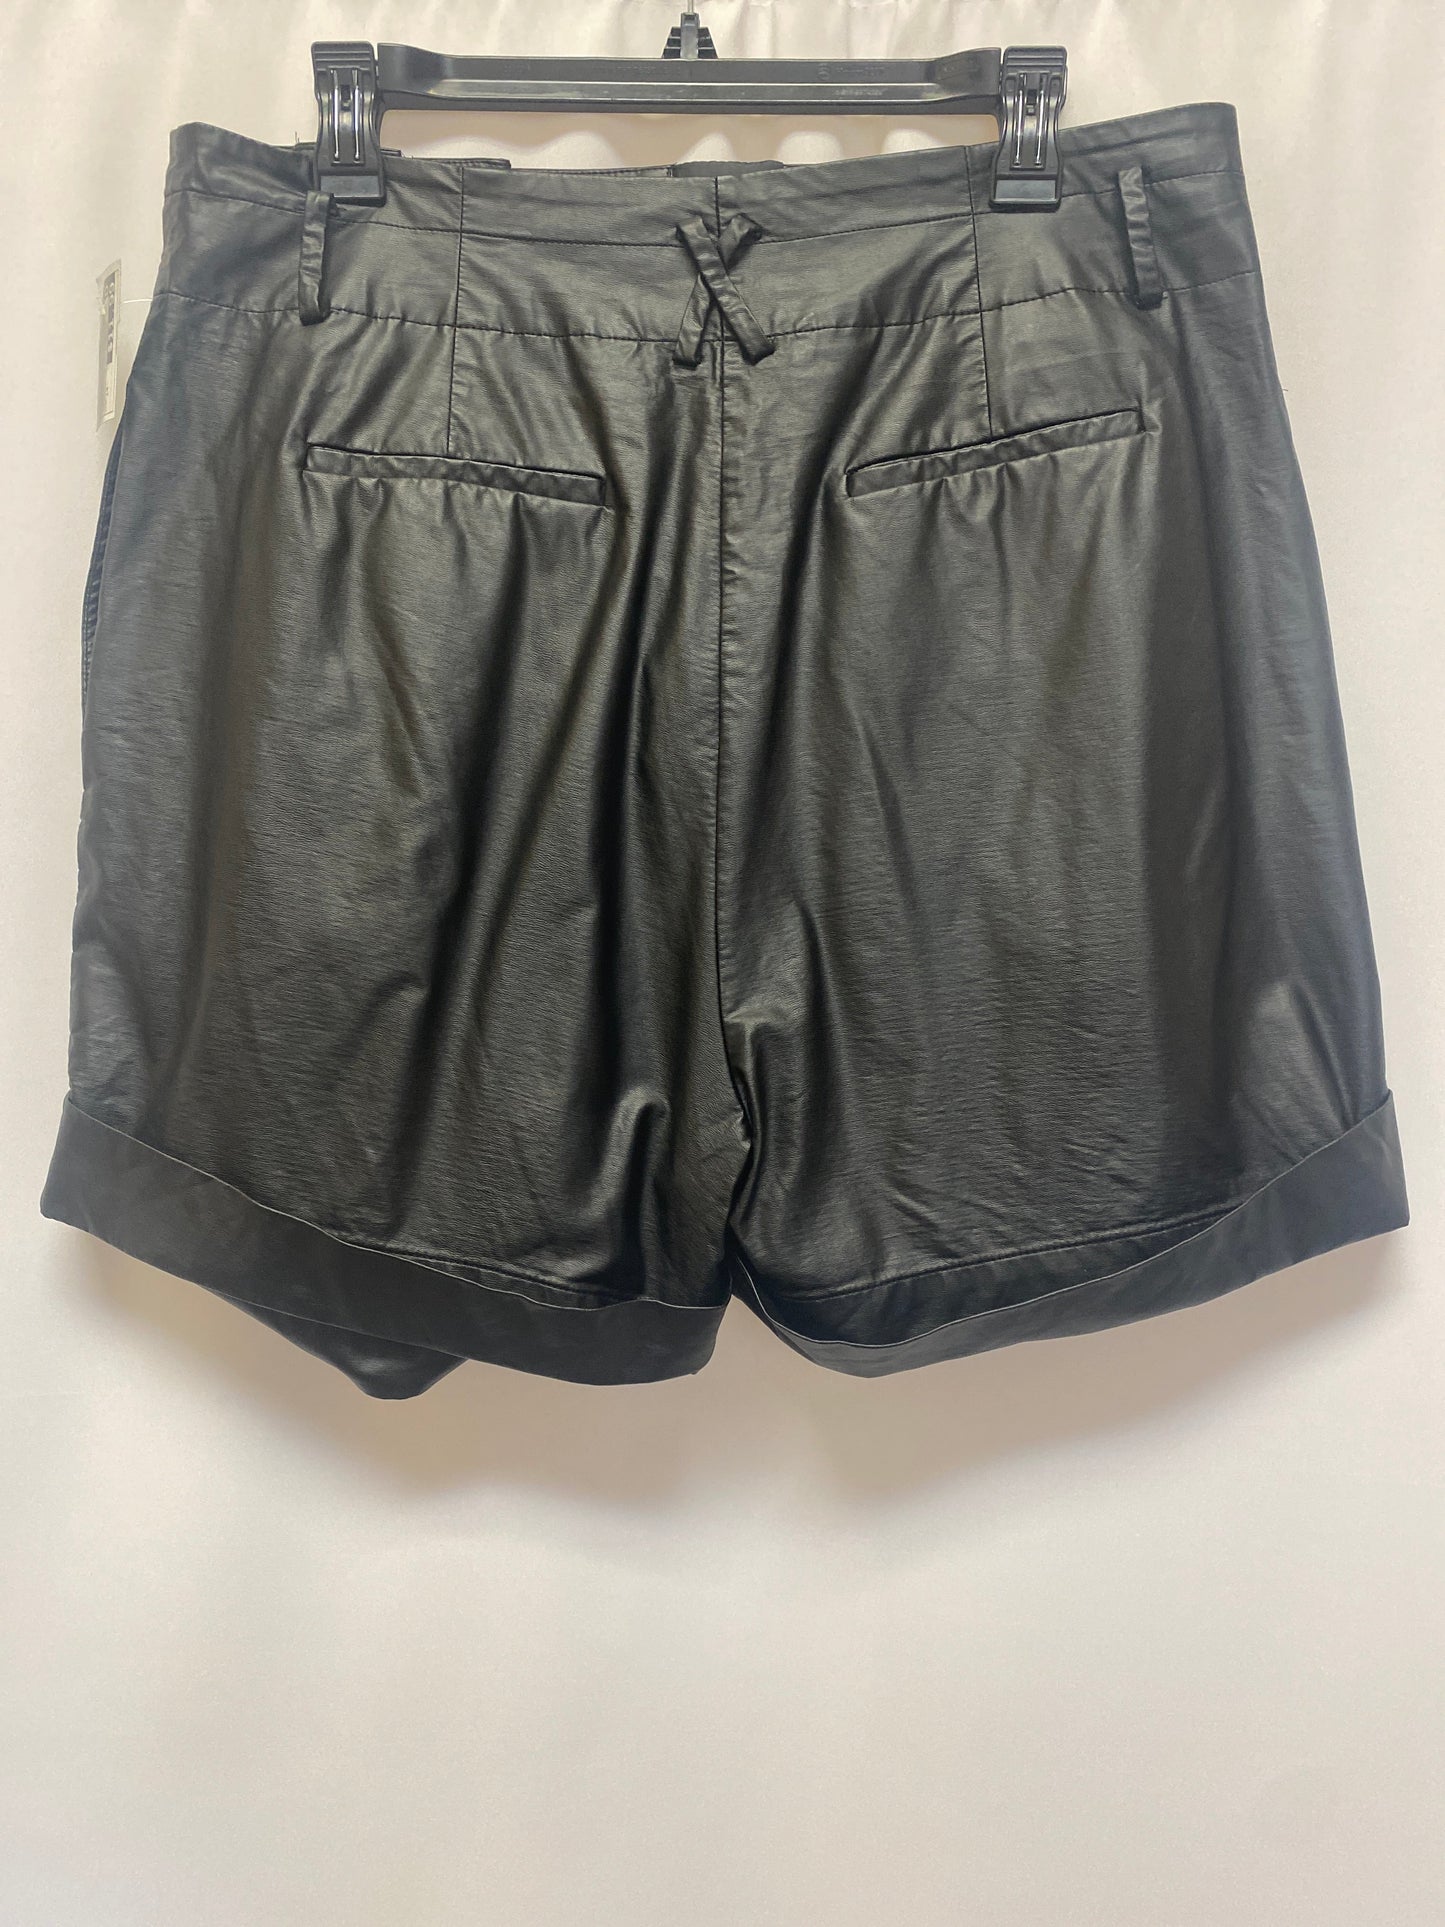 Shorts By Elizabeth And James  Size: 14